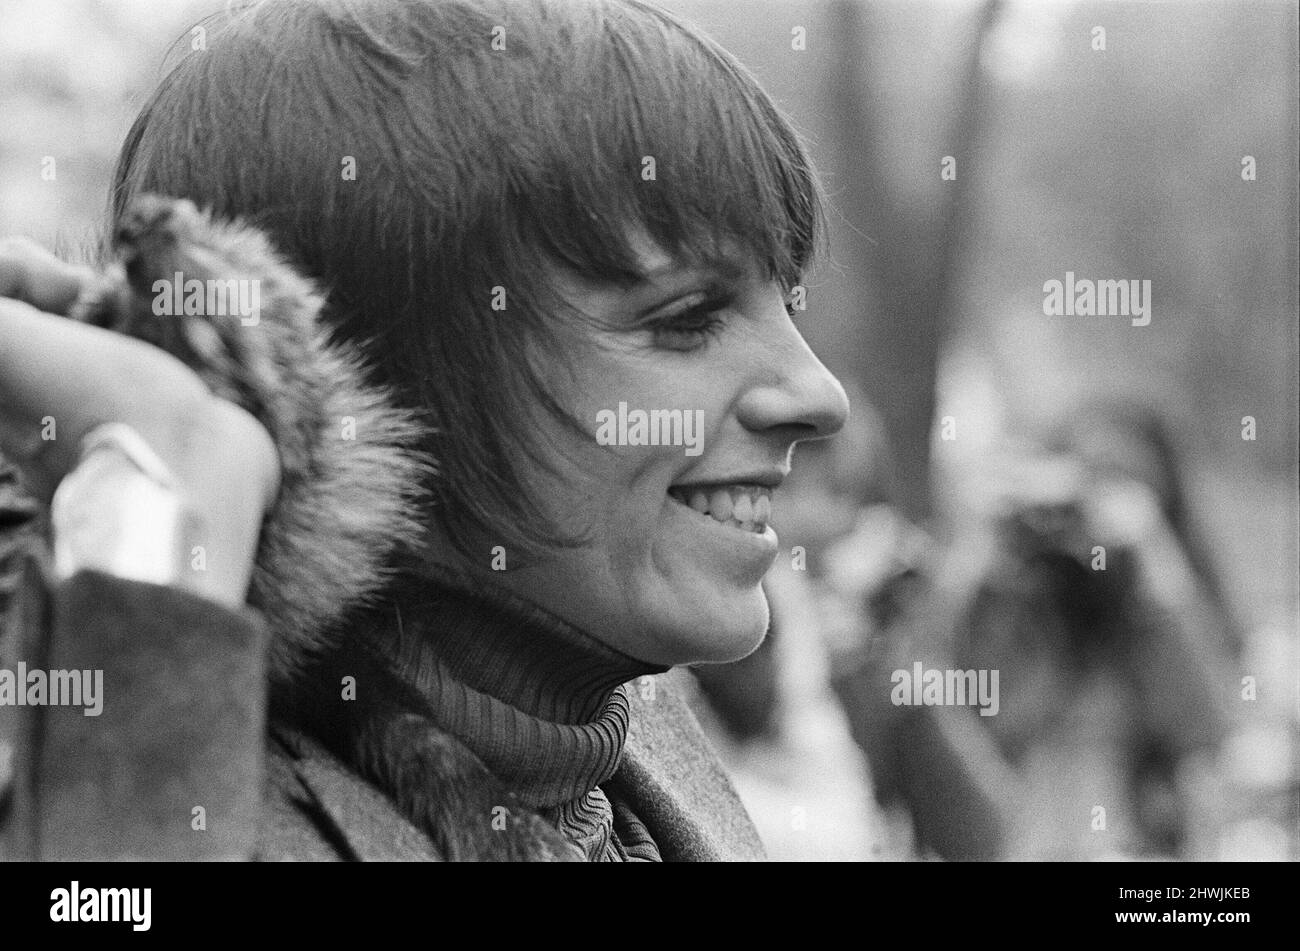 Liza Minnelli , actor and singer, pictured at The Dorchester Hotel in London. Liza, last night, played a show at The Rainbow Theatre in Finsbury Park, North London.  Sunday 13th May 1973. Only last year, 1972, Liza starred in the film Caberet.  Liza is surrounded by photographers as she smiles and comments on her time in London.  Picture taken Monday 14th May 1973 Stock Photo